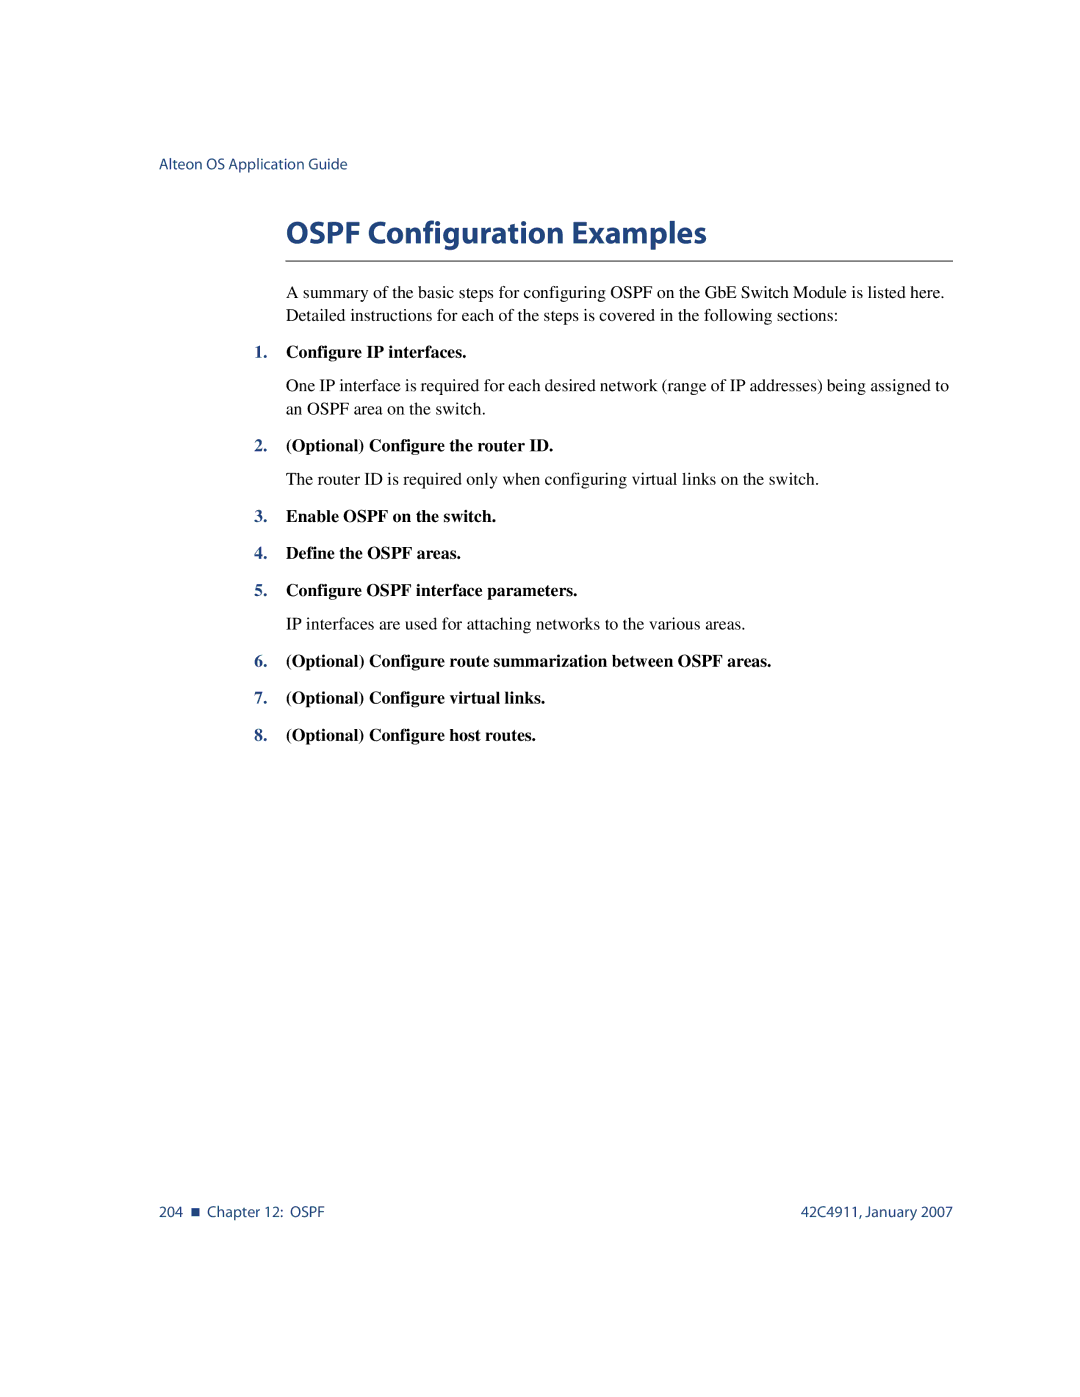 Nortel Networks 42C4911 manual Ospf Configuration Examples, Configure IP interfaces, Optional Configure the router ID 